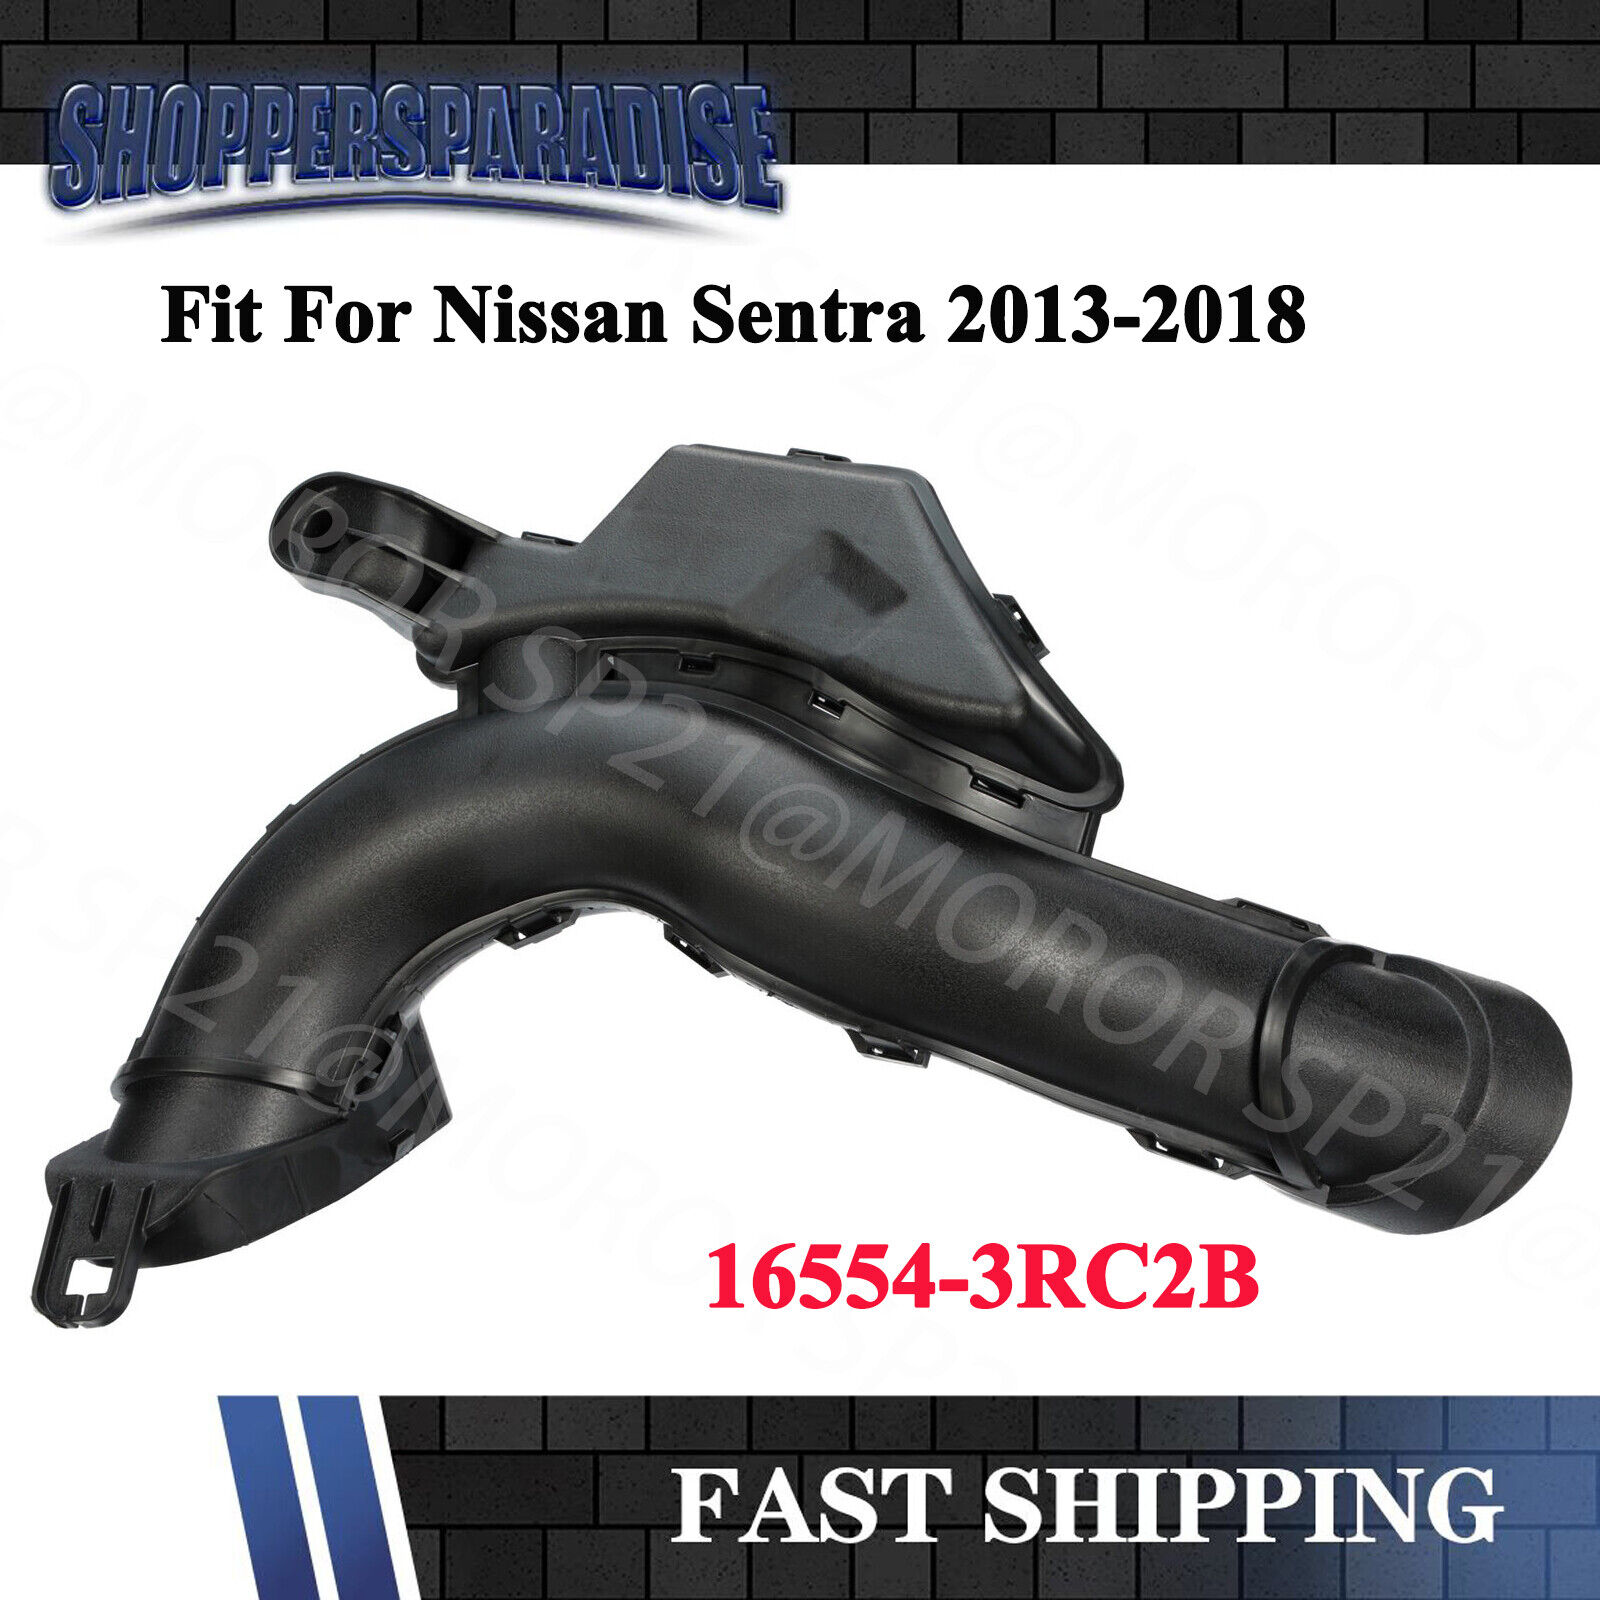 For Nissan Sentra 2013-2018 Rear Engine Air Intake Duct Box OEM NEW 16554-3RC2B